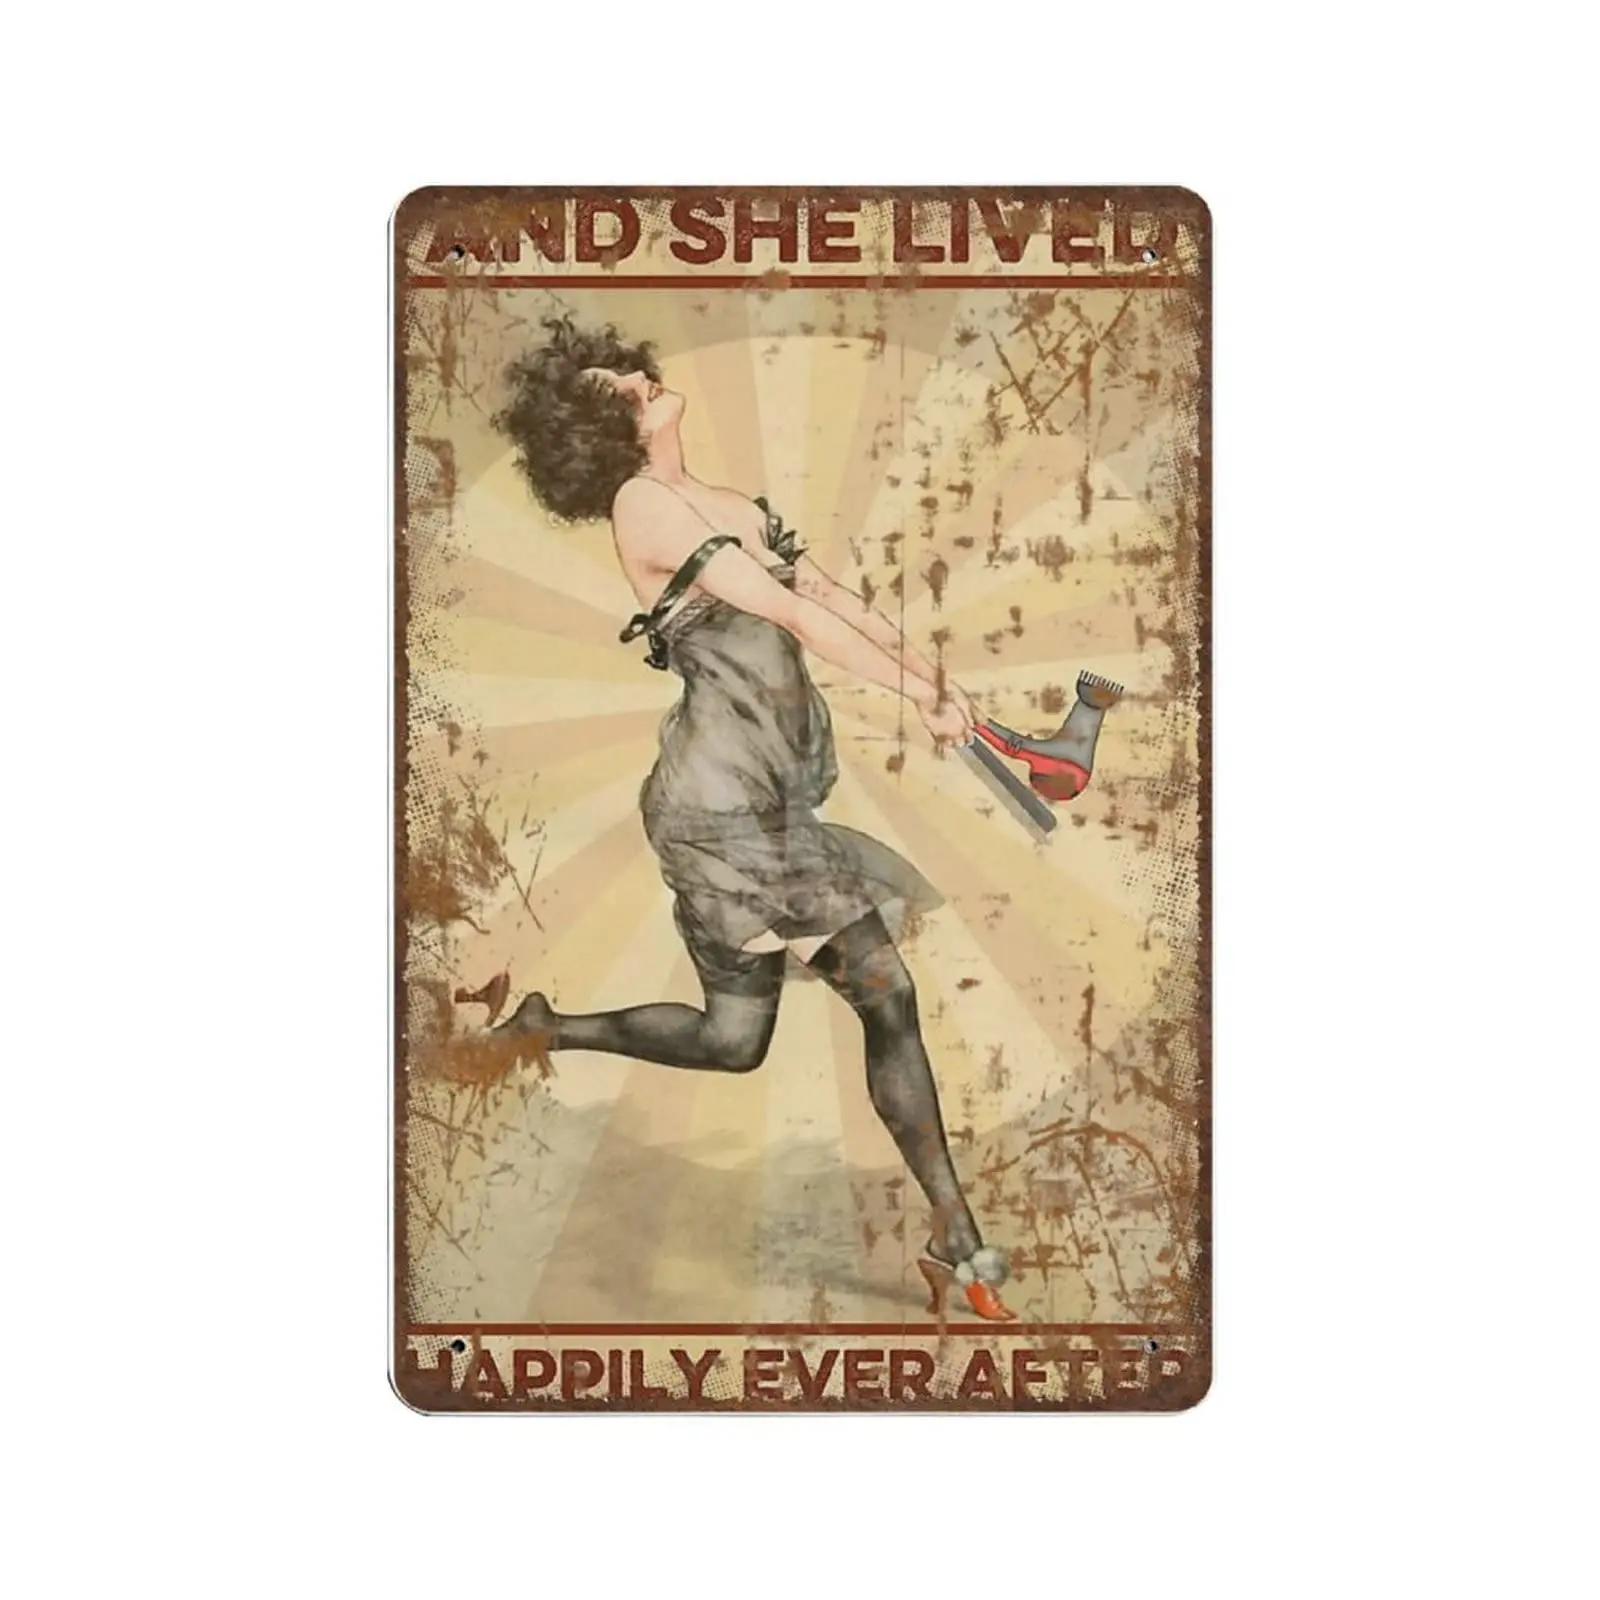 

Vintage Thick Metal Tin Sign-and She Lived Happily Ever After Tin Sign -Novelty Hairstylist Poster，Salon Decor Wall Art，Funny Si